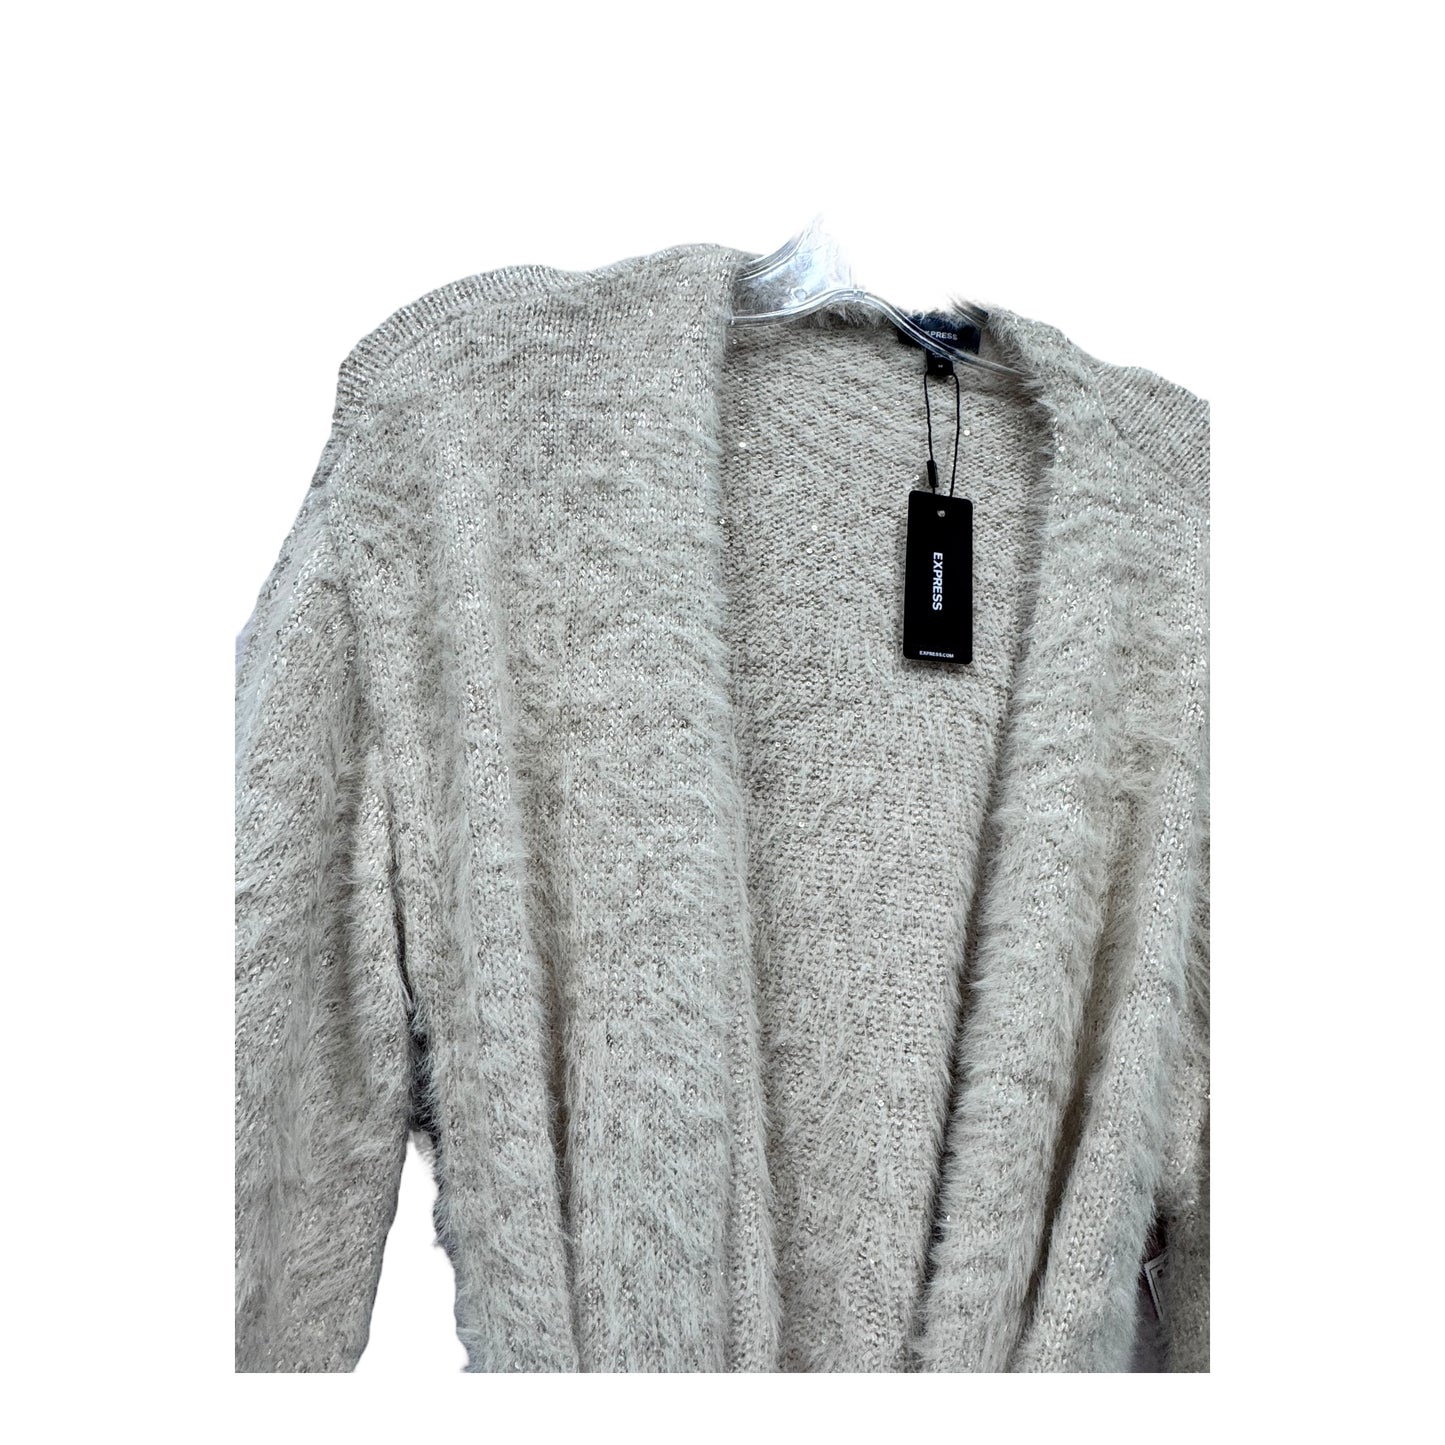 Sweater Cardigan By Express  Size: M